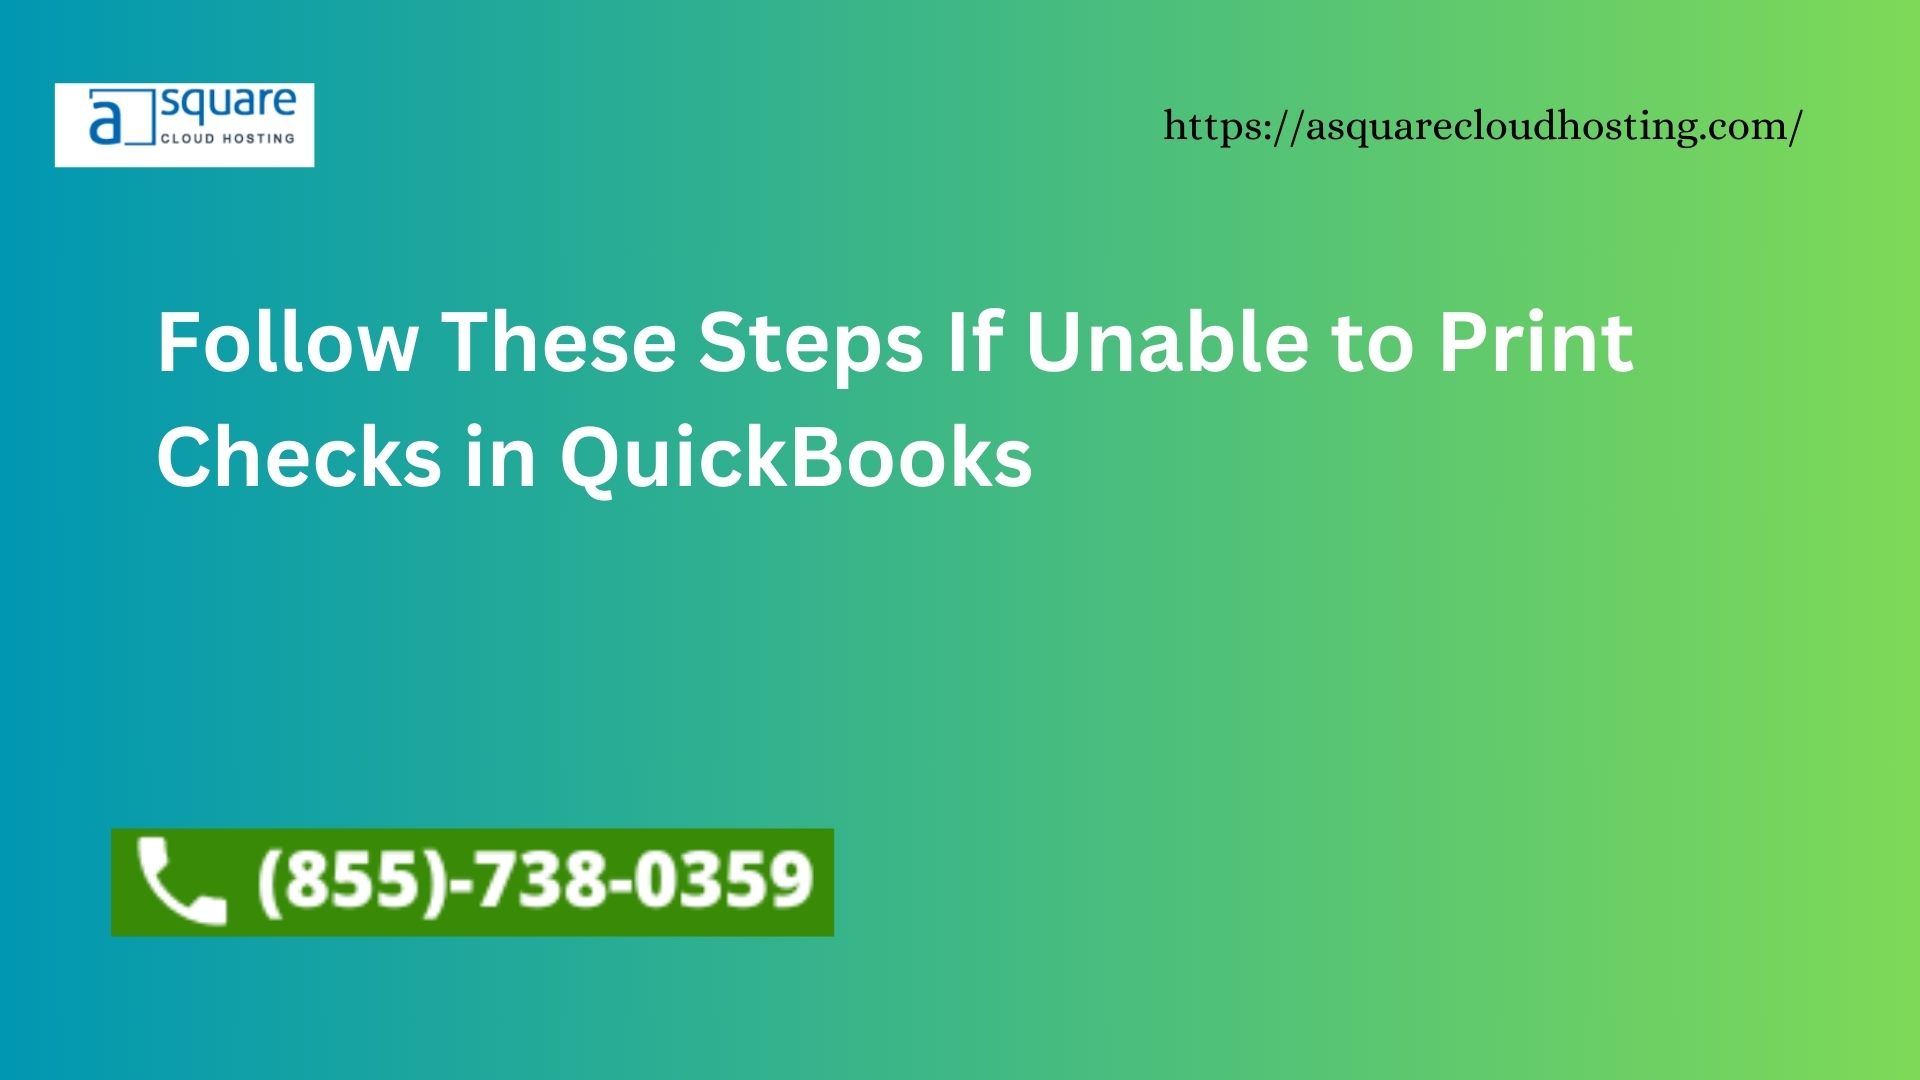 Follow These Steps If Unable to Print Checks in QuickBooks